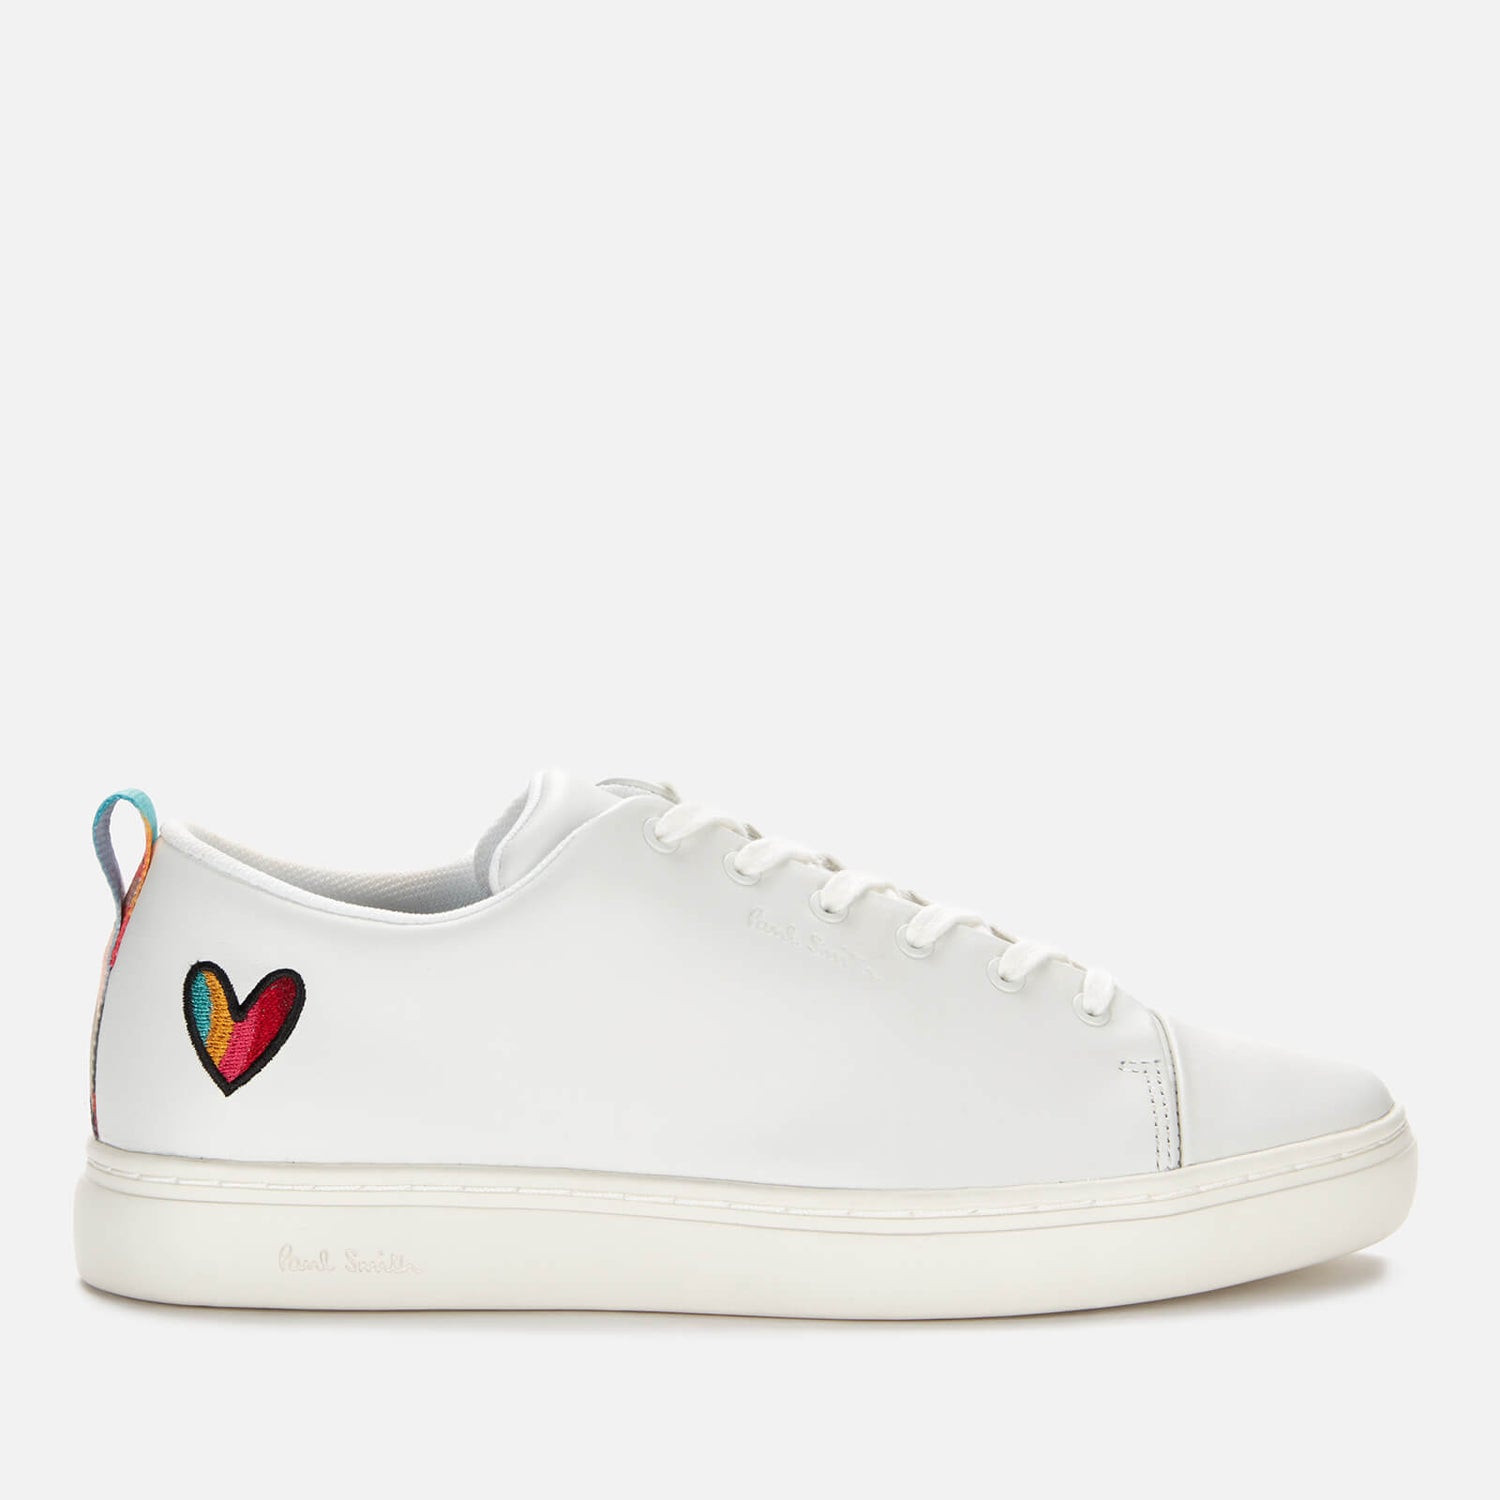 Paul Smith Women's Lee Leather Cupsole Trainers - White Heart - UK 5